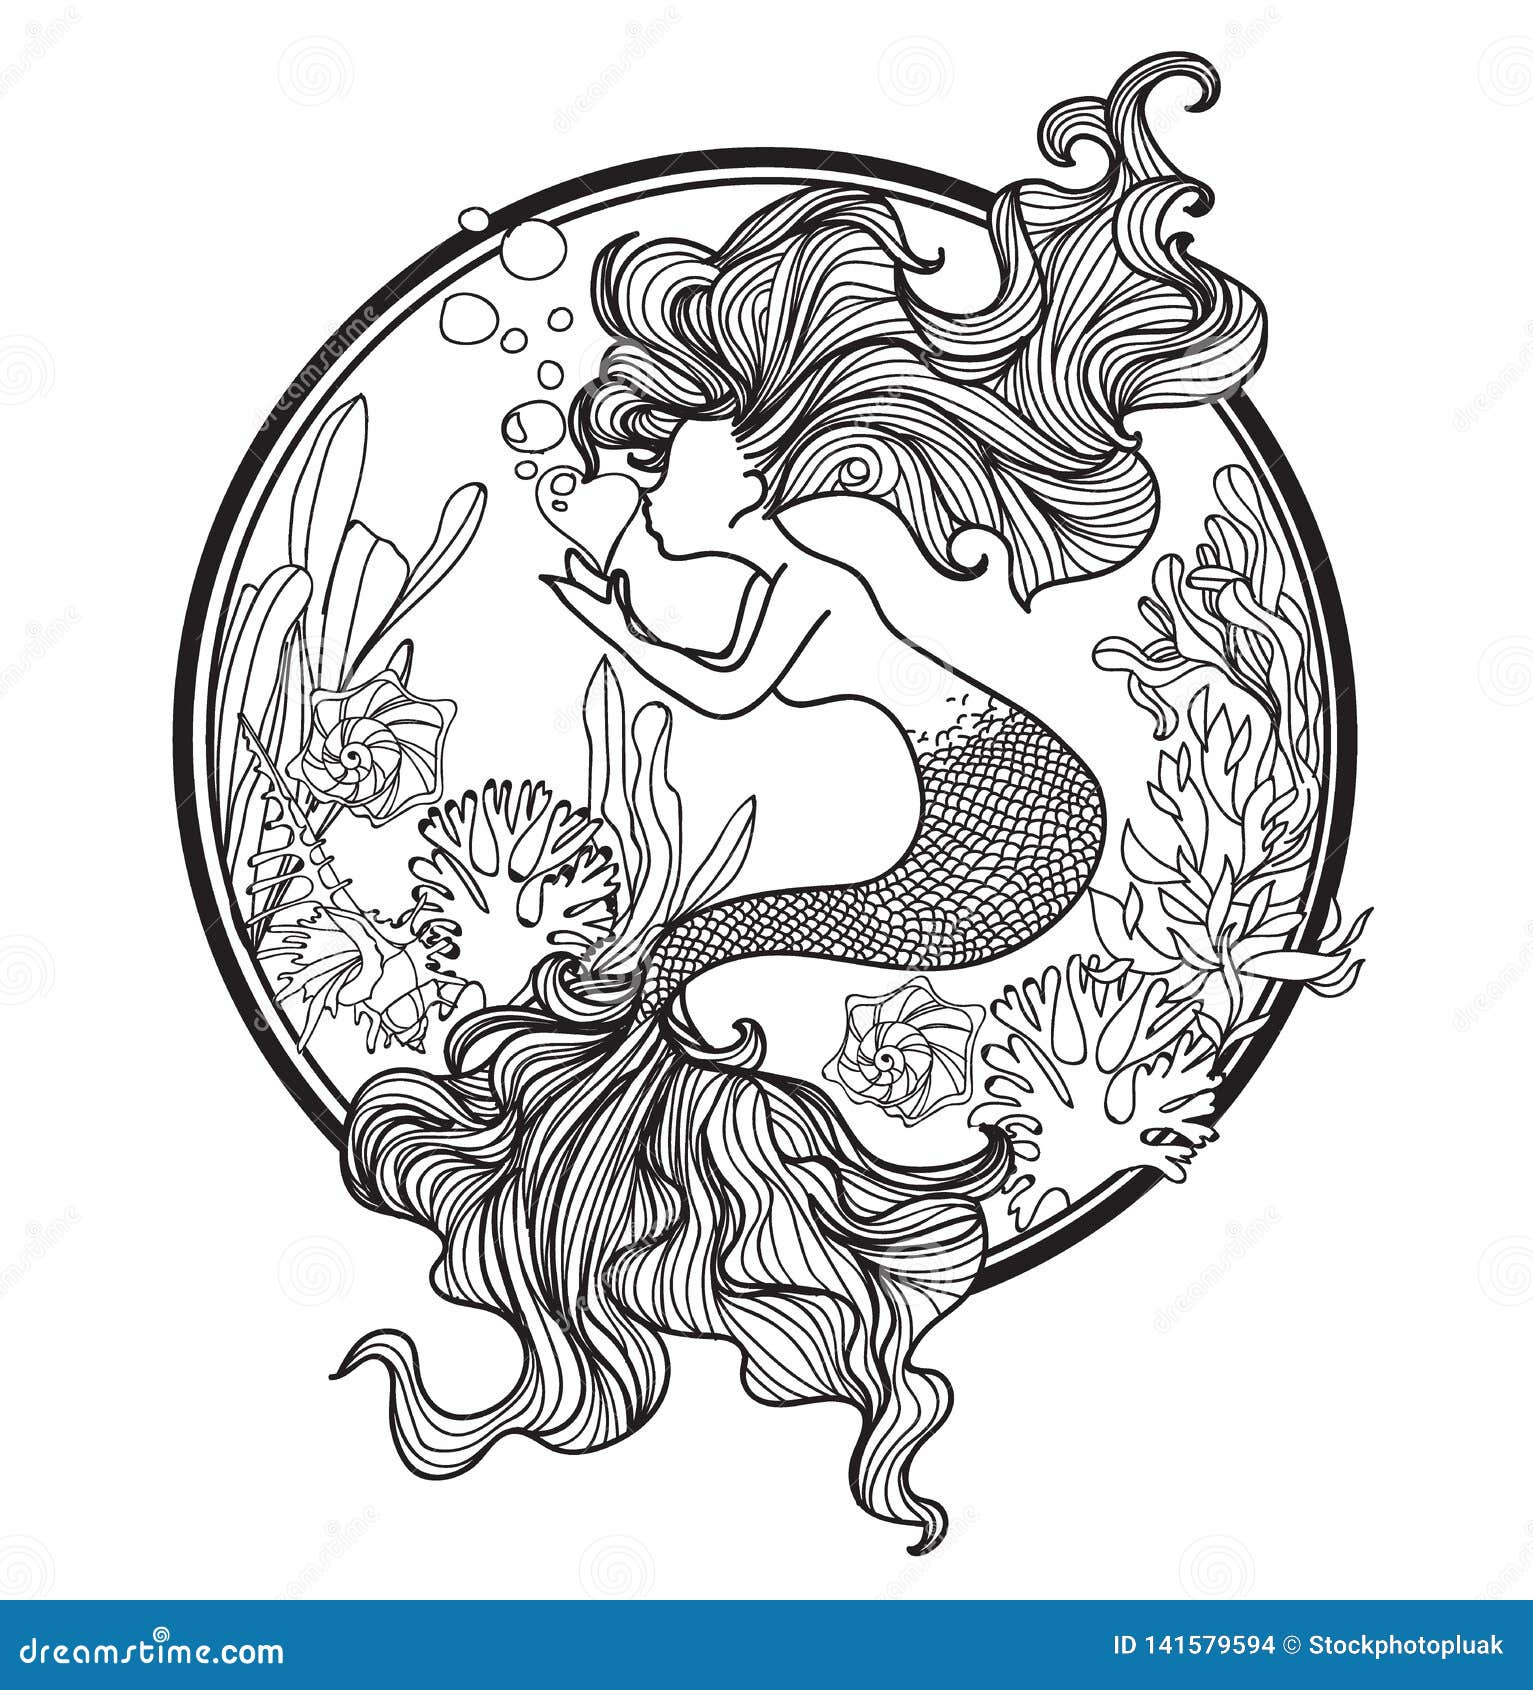 Steal the Most Wanted Mermaid Tattoo Ideas  MyBodiArt